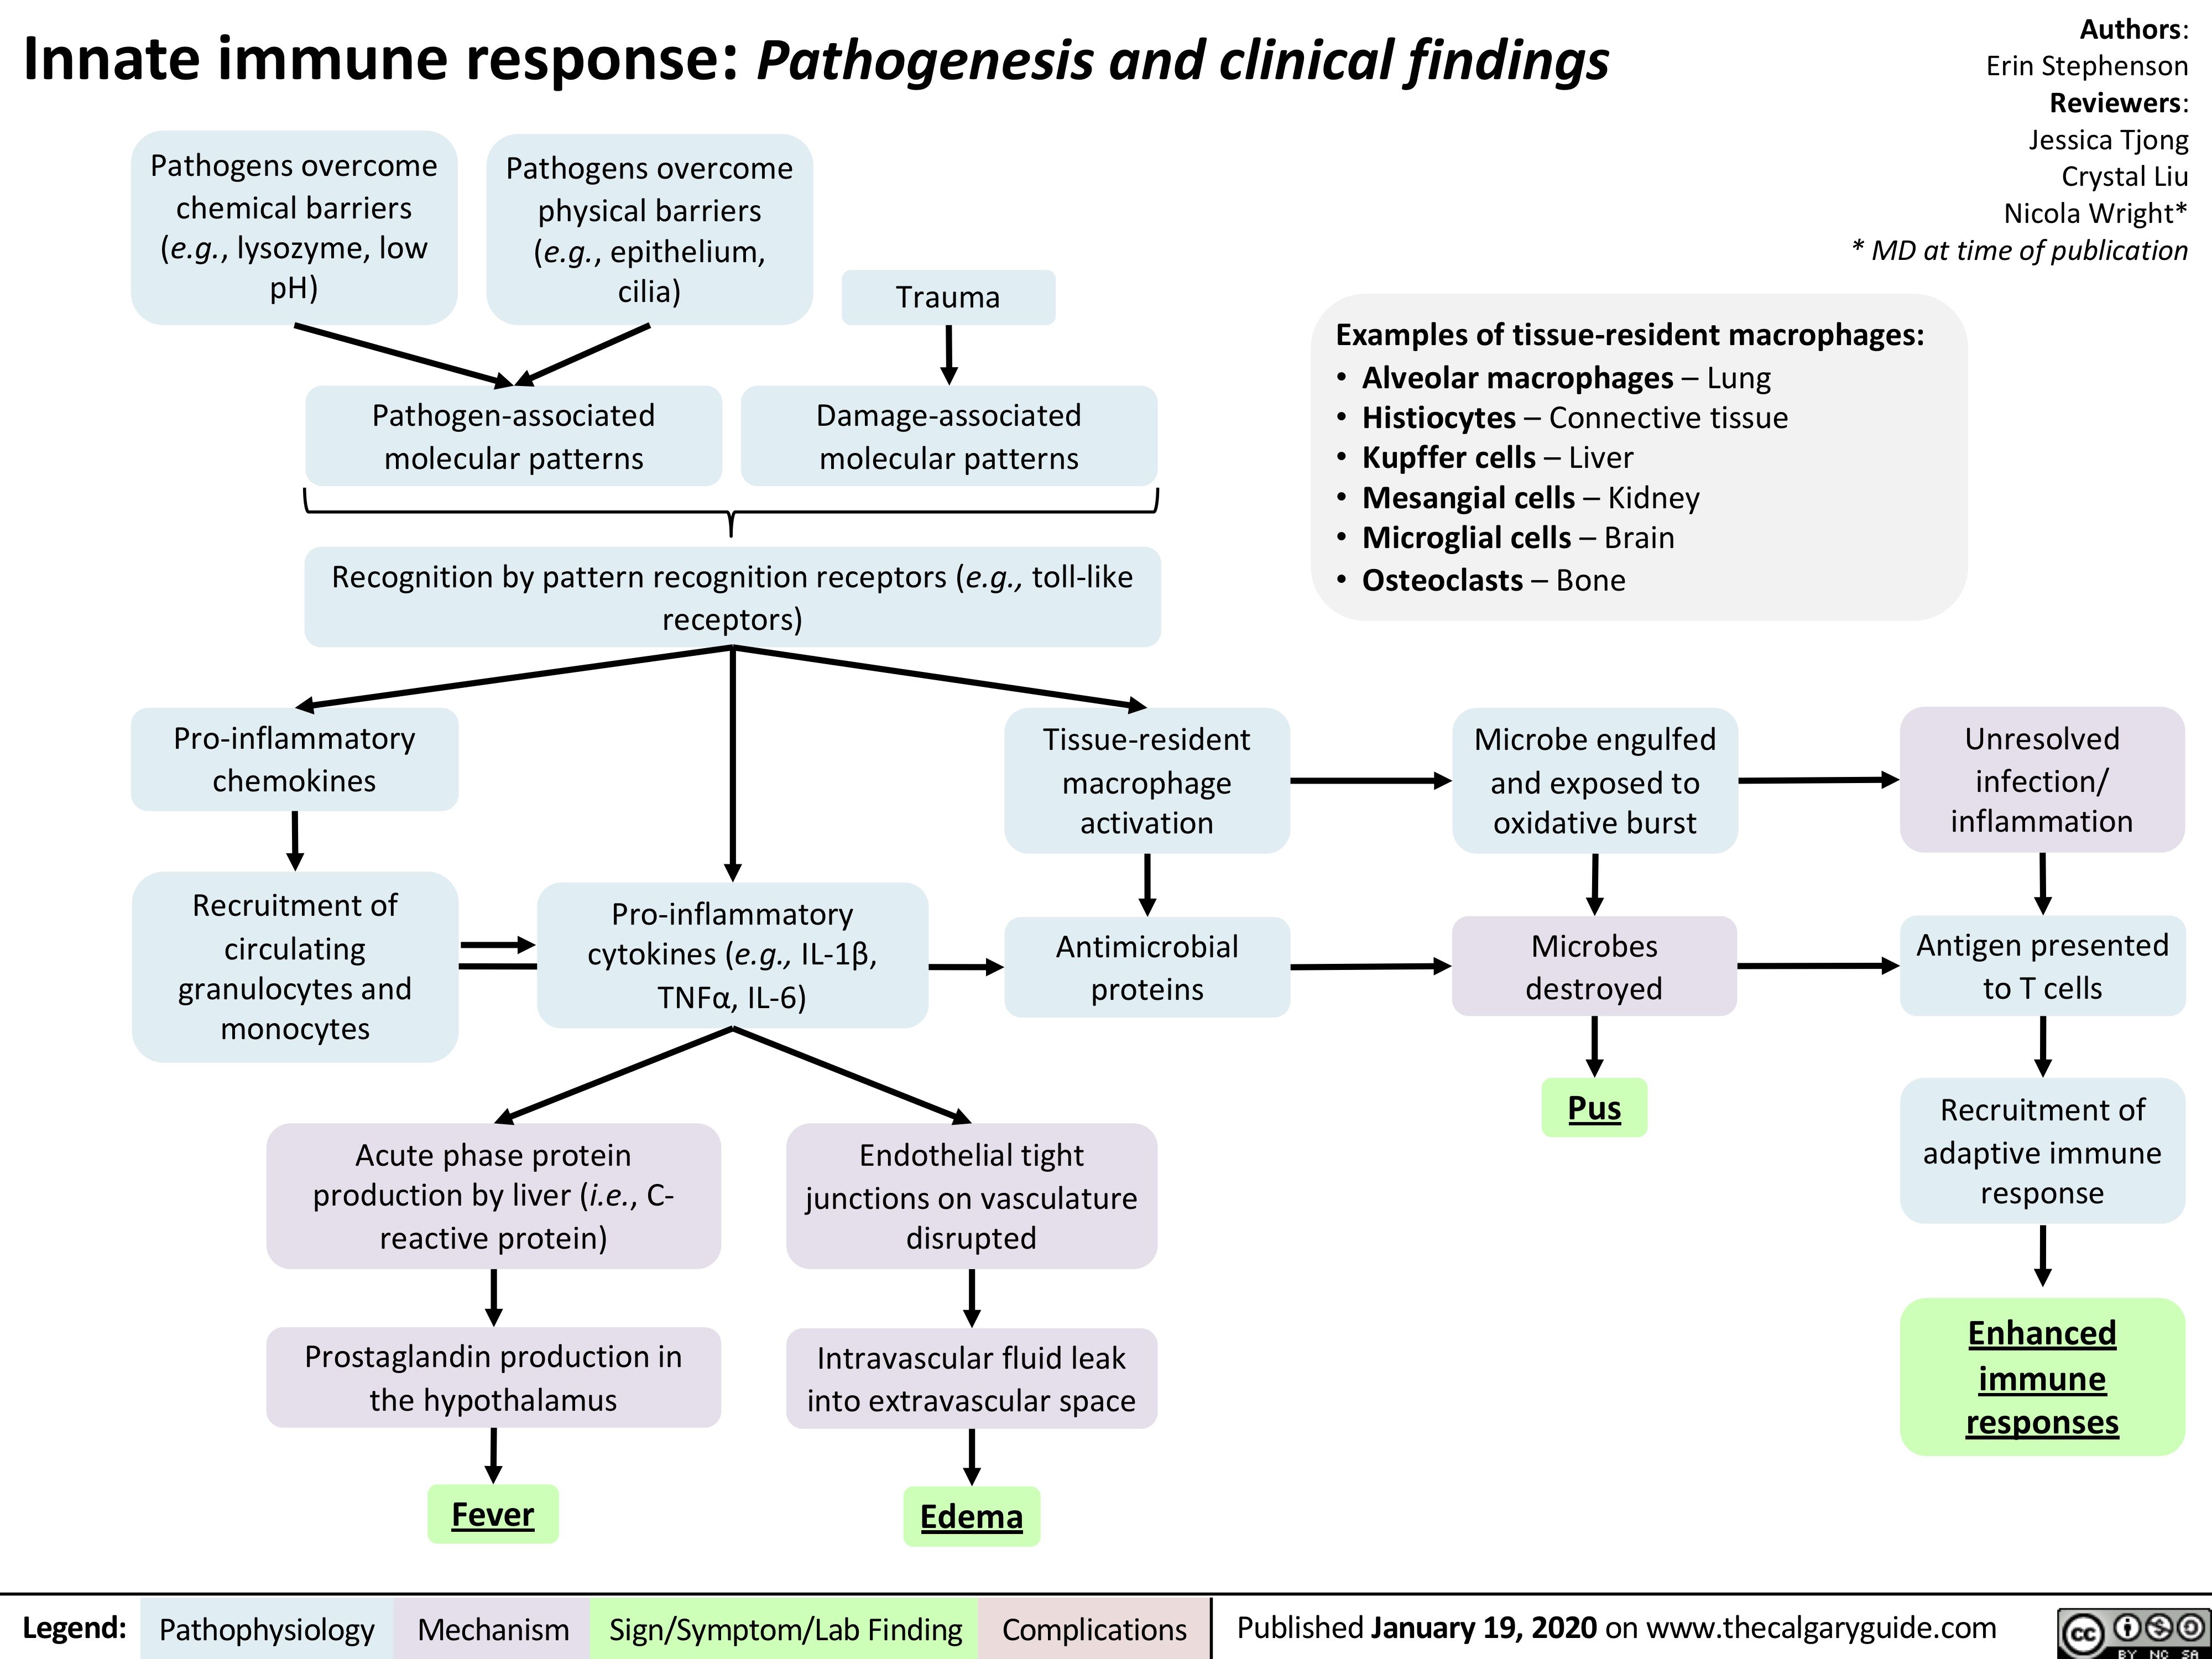 Innate immune response: Pathogenesis and clinical findings
Authors: Erin Stephenson Reviewers: Jessica Tjong Crystal Liu Nicola Wright* * MD at time of publication
  Pathogens overcome chemical barriers (e.g., lysozyme, low pH)
Pathogens overcome physical barriers (e.g., epithelium, cilia)
Trauma
Damage-associated molecular patterns
       Pathogen-associated molecular patterns
Examples of tissue-resident macrophages: • Alveolar macrophages – Lung
• Histiocytes – Connective tissue
• Kupffer cells – Liver
  Recognition by pattern recognition receptors (e.g., toll-like receptors)
• Mesangial cells – Kidney • Microglial cells – Brain
• Osteoclasts – Bone
Microbe engulfed and exposed to oxidative burst
Microbes destroyed
Pus
      Pro-inflammatory chemokines
Recruitment of circulating
granulocytes and monocytes
Pro-inflammatory cytokines (e.g., IL-1β, TNFα, IL-6)
Tissue-resident macrophage activation
Antimicrobial proteins
Unresolved infection/ inflammation
Antigen presented to T cells
Recruitment of adaptive immune response
Enhanced immune responses
                        Acute phase protein production by liver (i.e., C- reactive protein)
Prostaglandin production in the hypothalamus
Fever
Endothelial tight junctions on vasculature disrupted
Intravascular fluid leak into extravascular space
Edema
              Legend:
 Pathophysiology
 Mechanism
Sign/Symptom/Lab Finding
  Complications
Published January 19, 2020 on www.thecalgaryguide.com
   